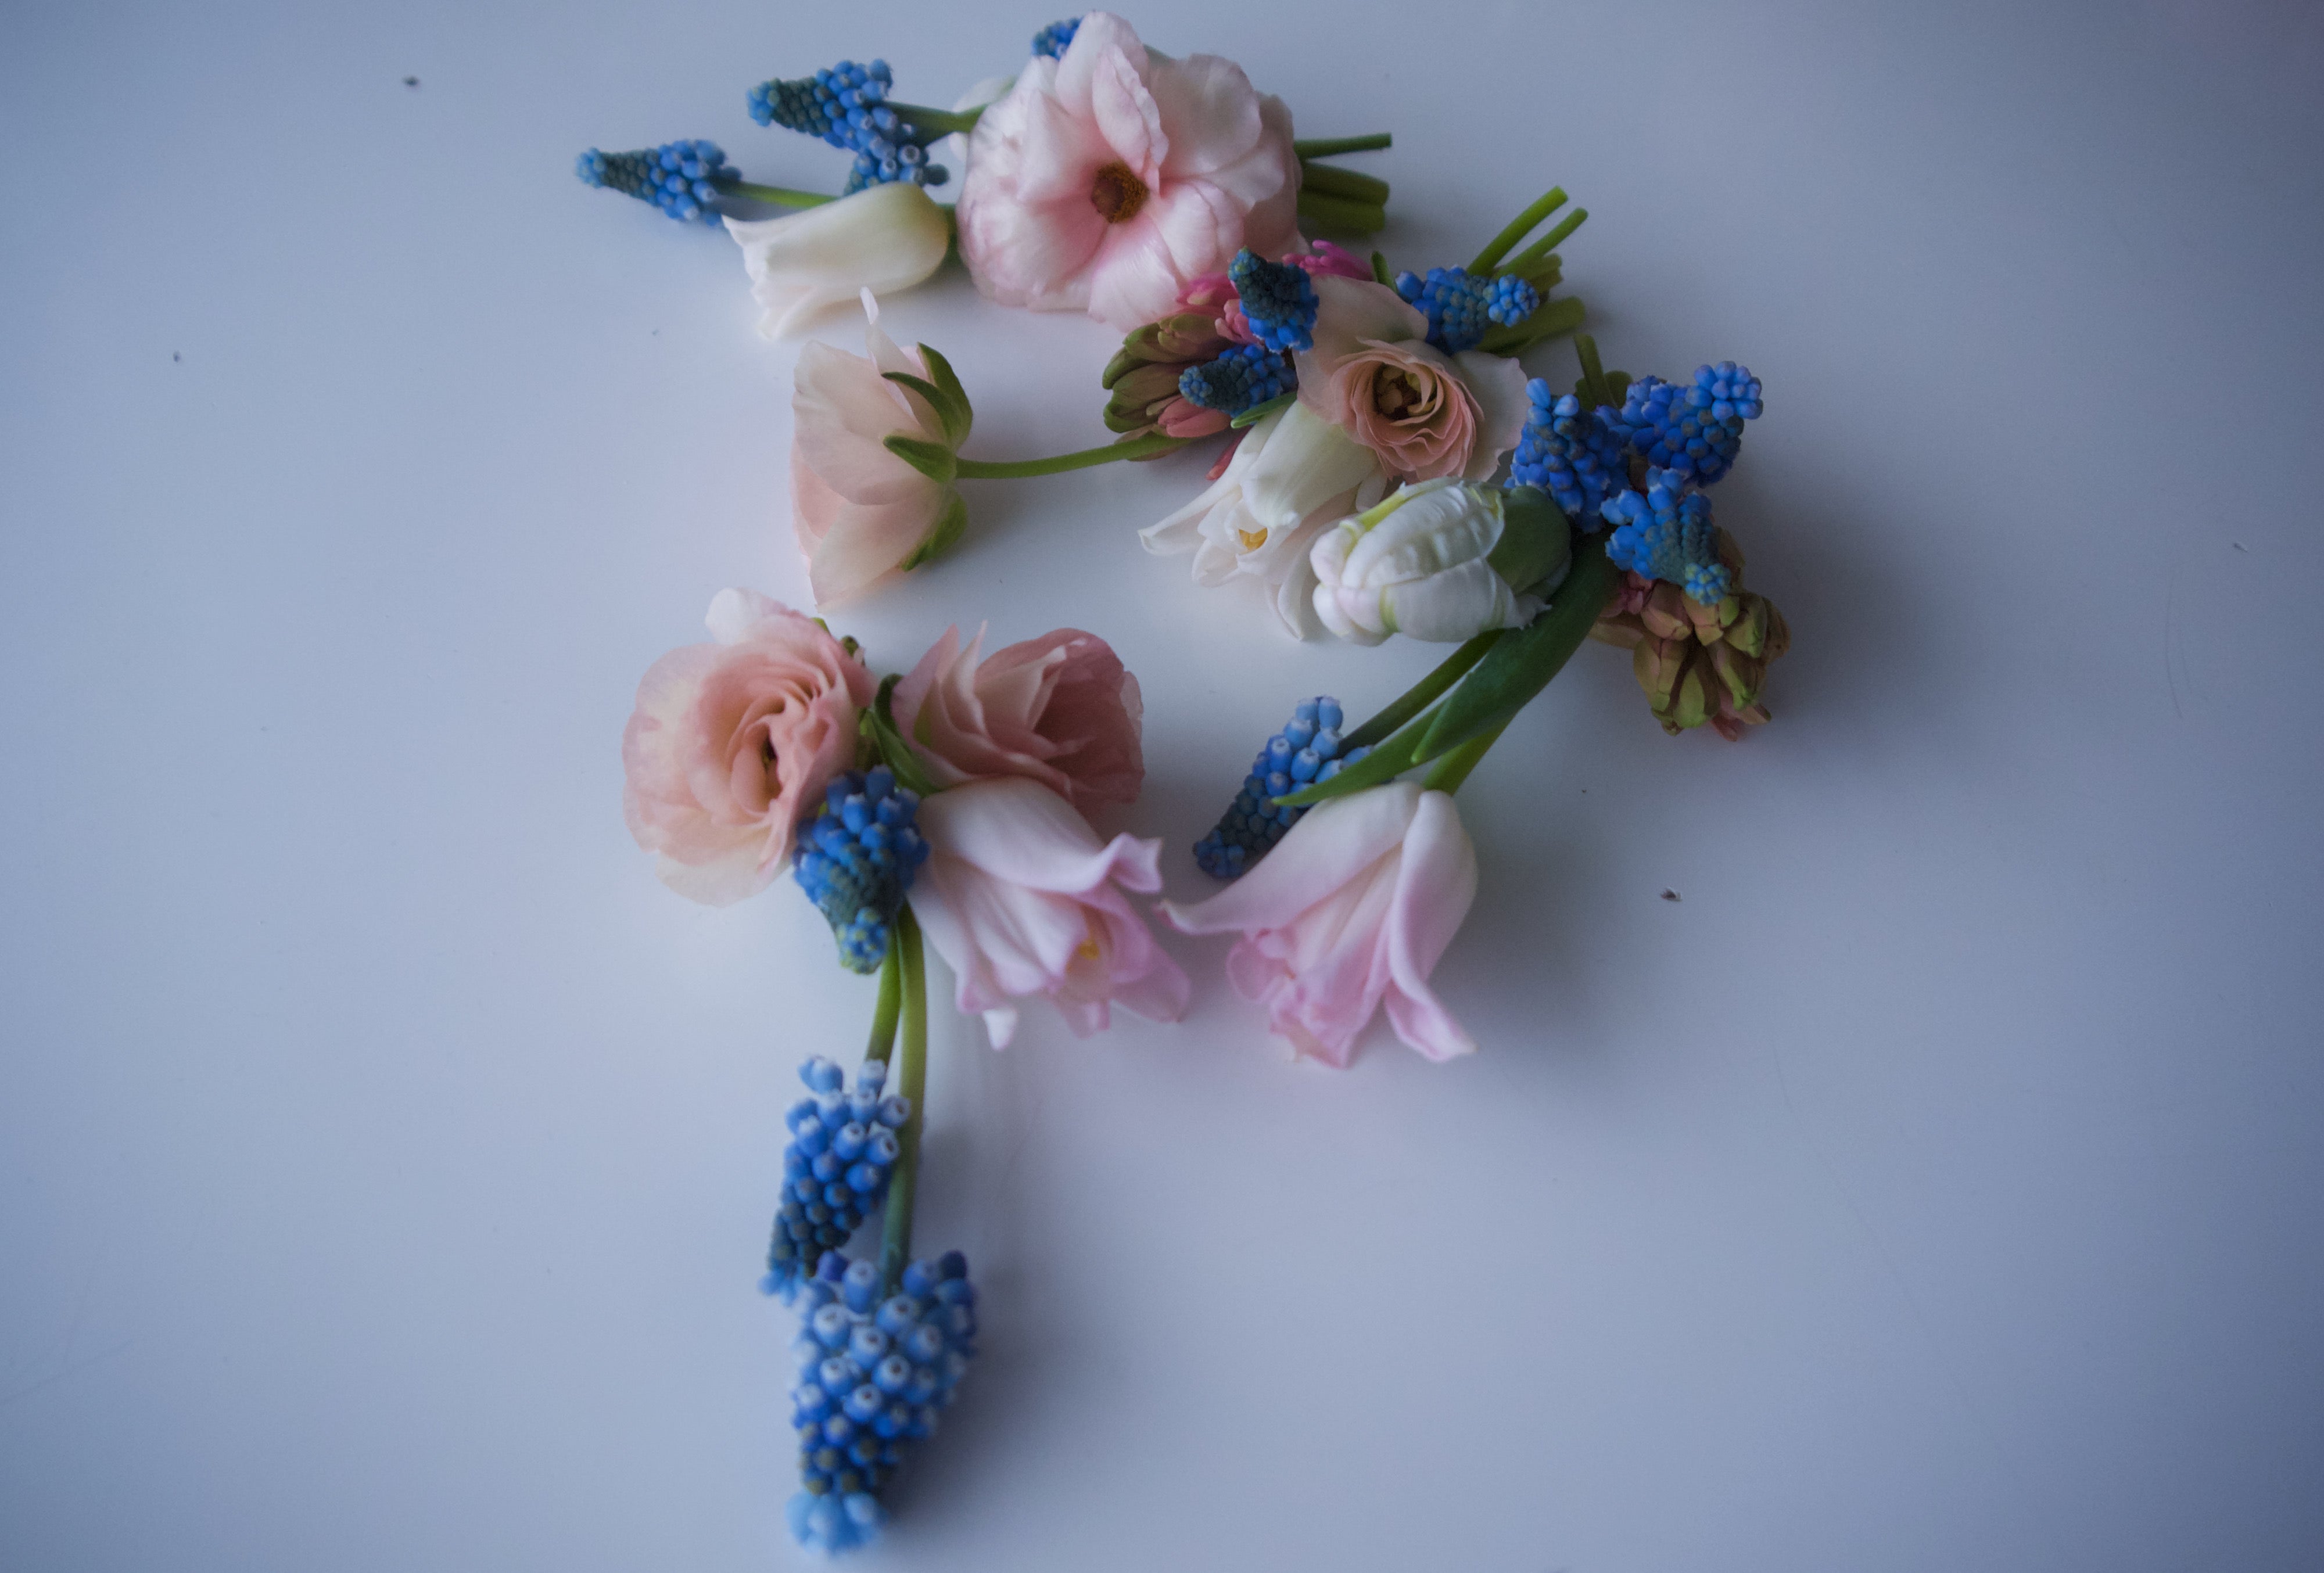 Portland Wedding Florist | Seasonal Flowers | Formerly known as boutonnieres or corsages - I call them KISSES.